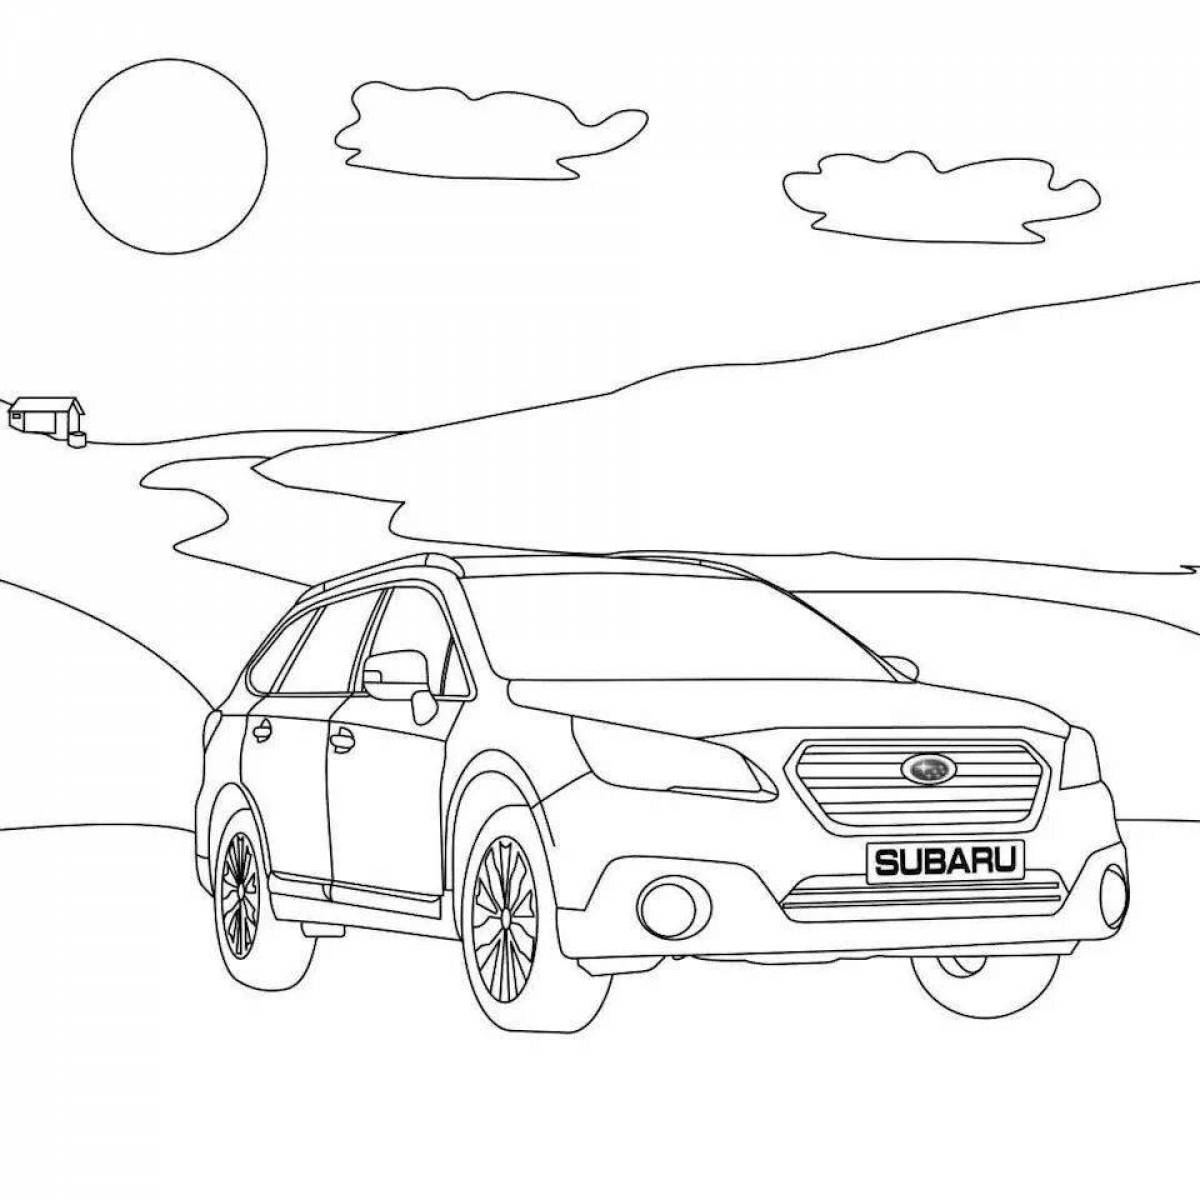 Subaru forester awesome coloring book